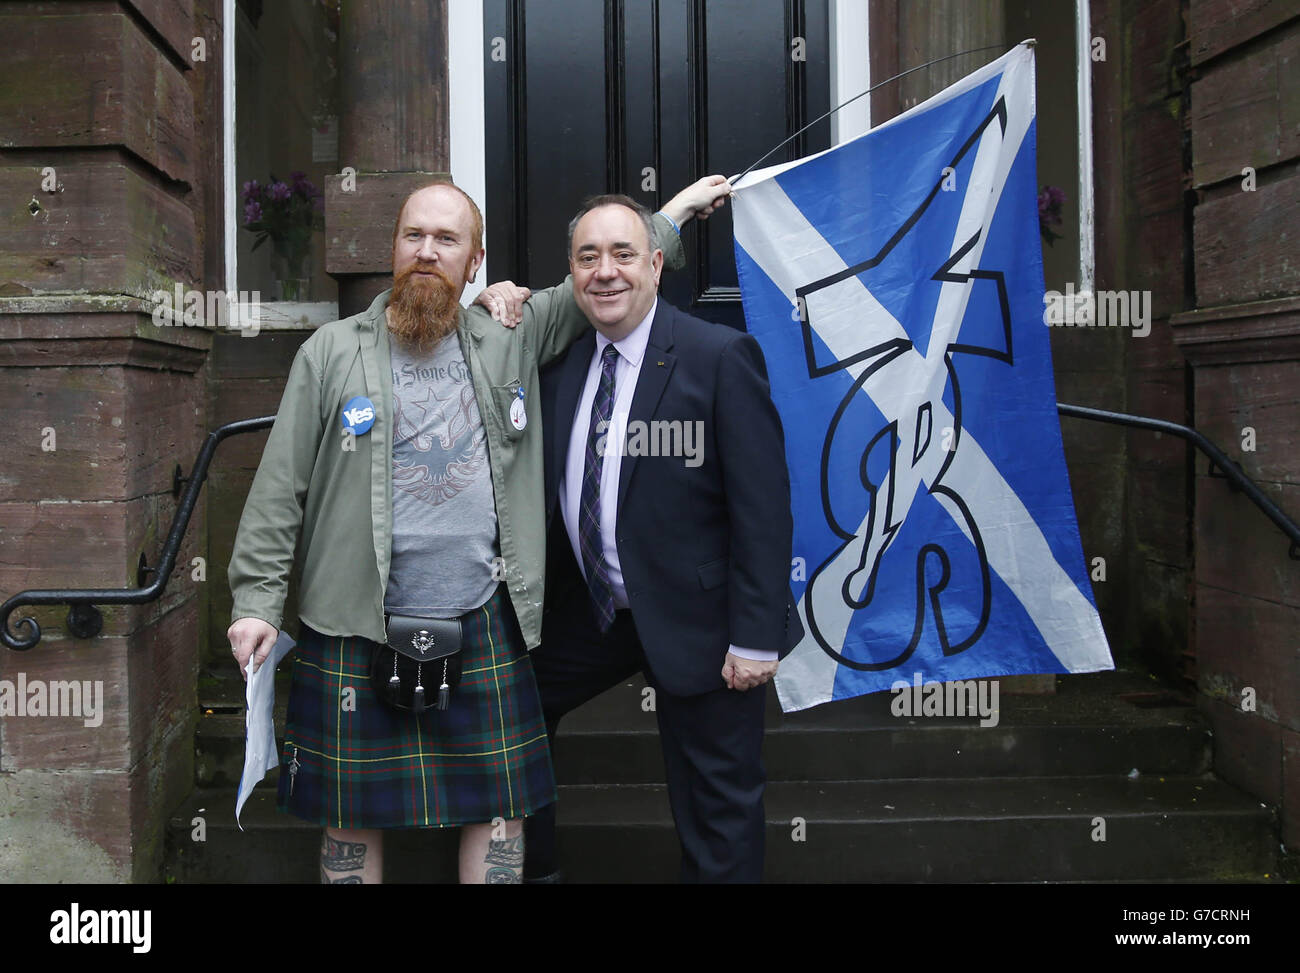 Scottish First Minister Alex Salmond is with a Yes supporter in Turriff during a historic day for Scotland as voters determine whether the country should remain part of the United Kingdom. Stock Photo